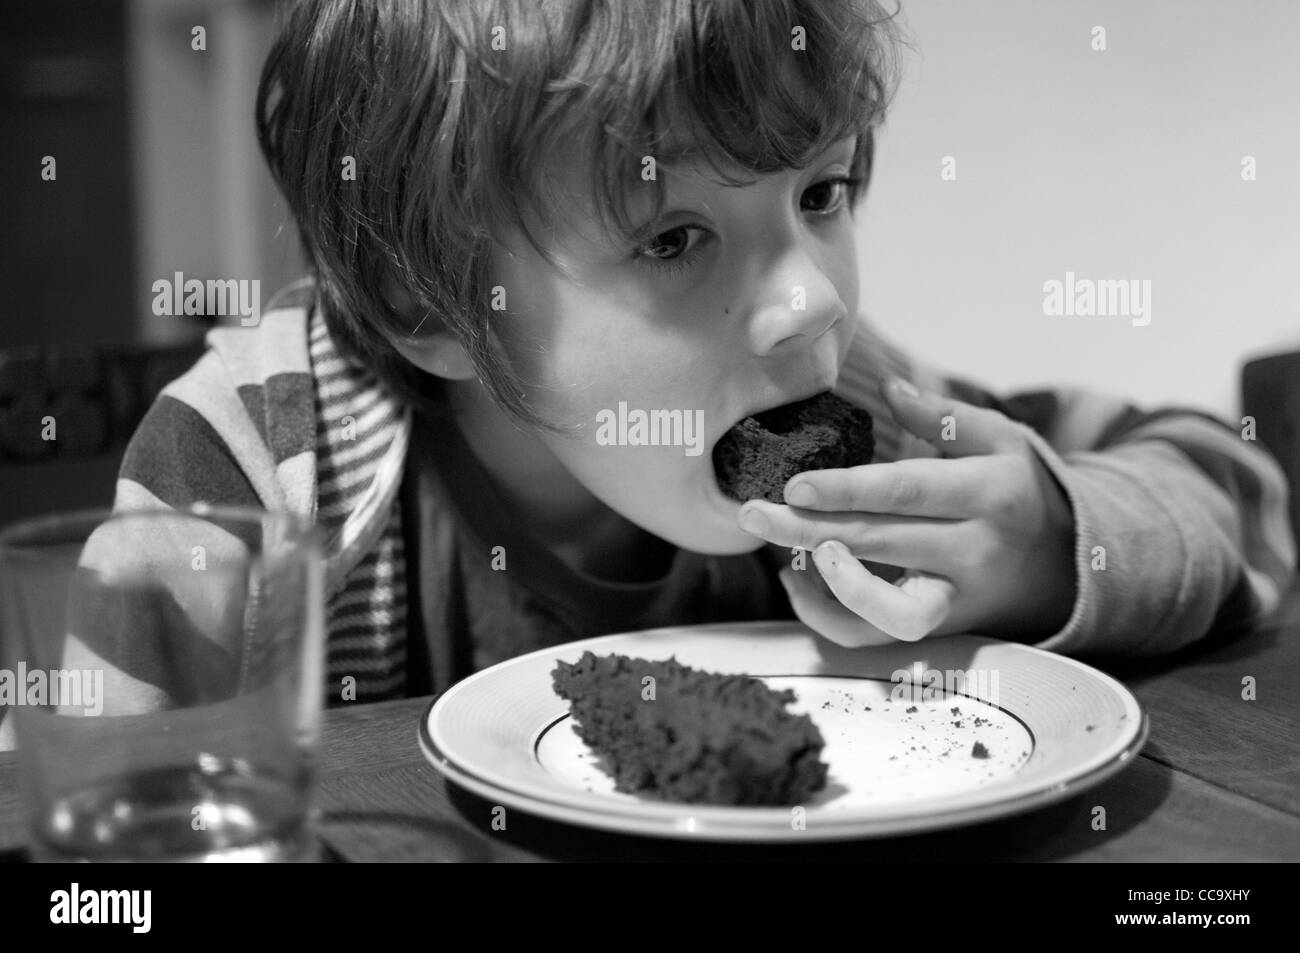 Young happy boy sitting at the table eating a piece of chocolate sponge cake Stock Photo